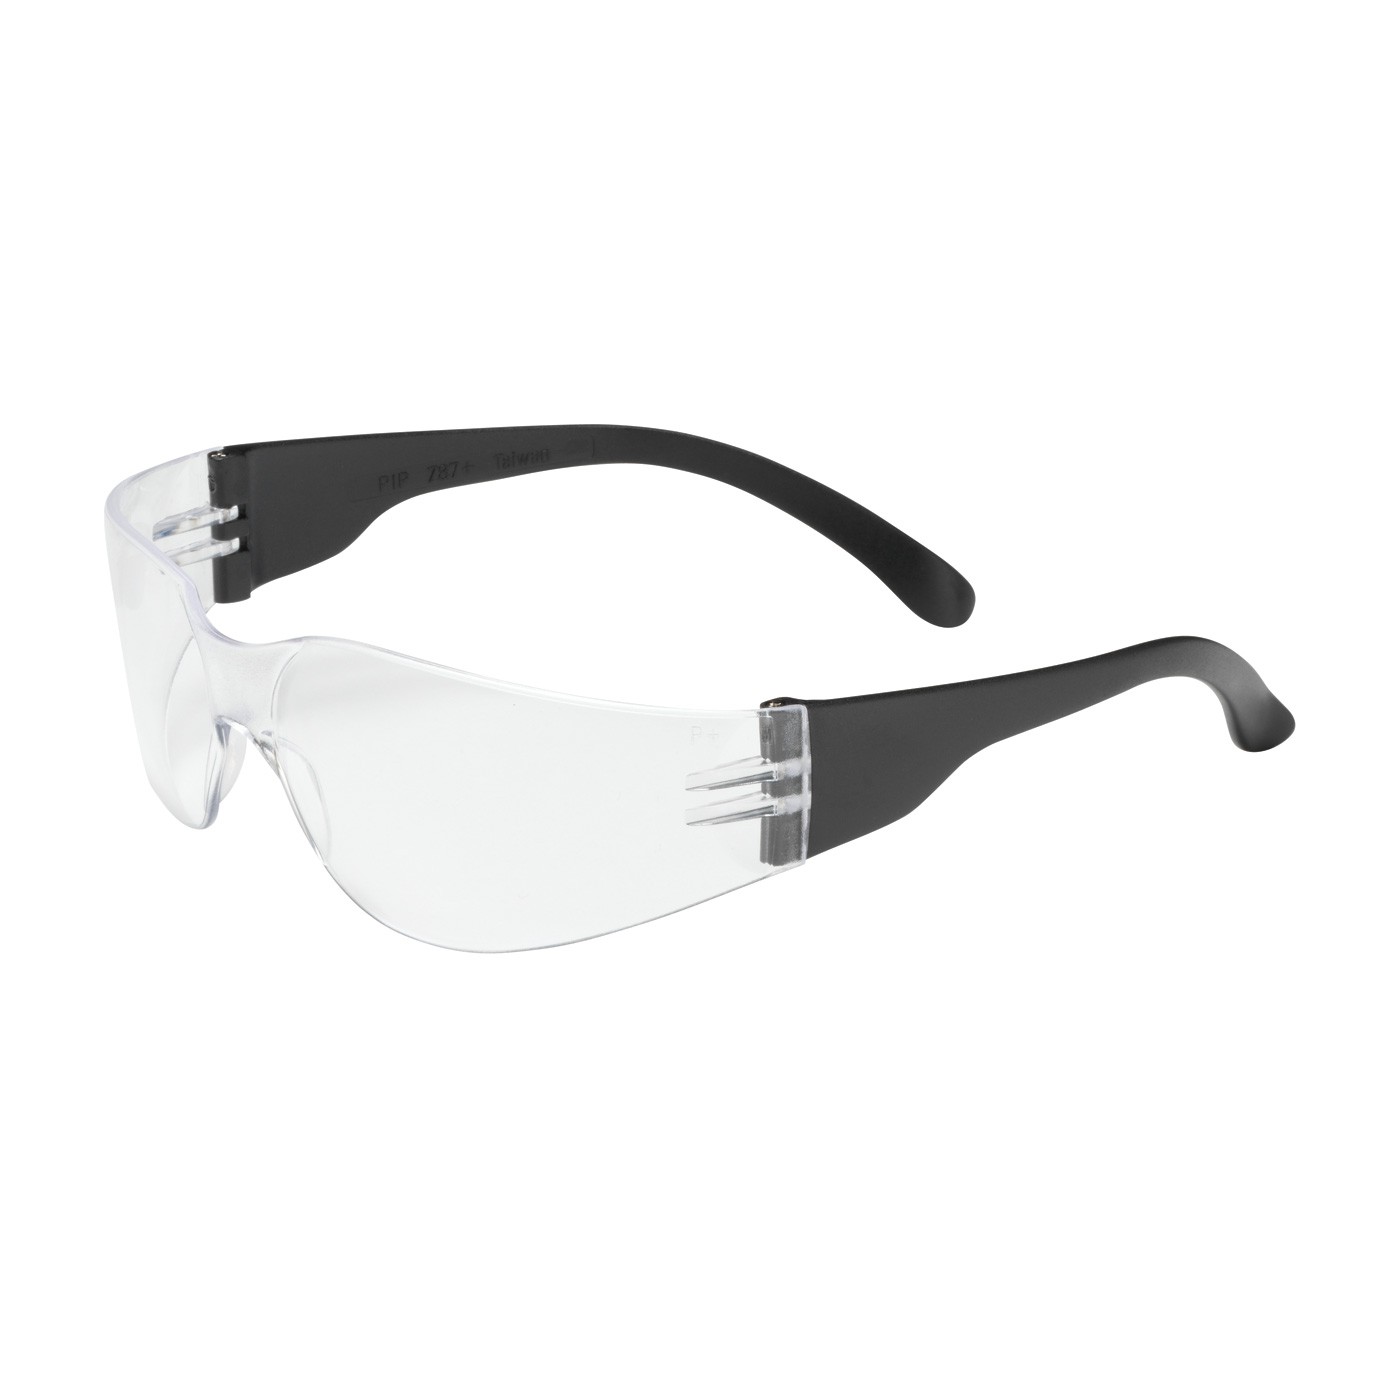 Zenon Z11sm™ Rimless Safety Glasses with Black Temple, Clear Lens and Anti-Scratch Coating  (#250-00-0000)